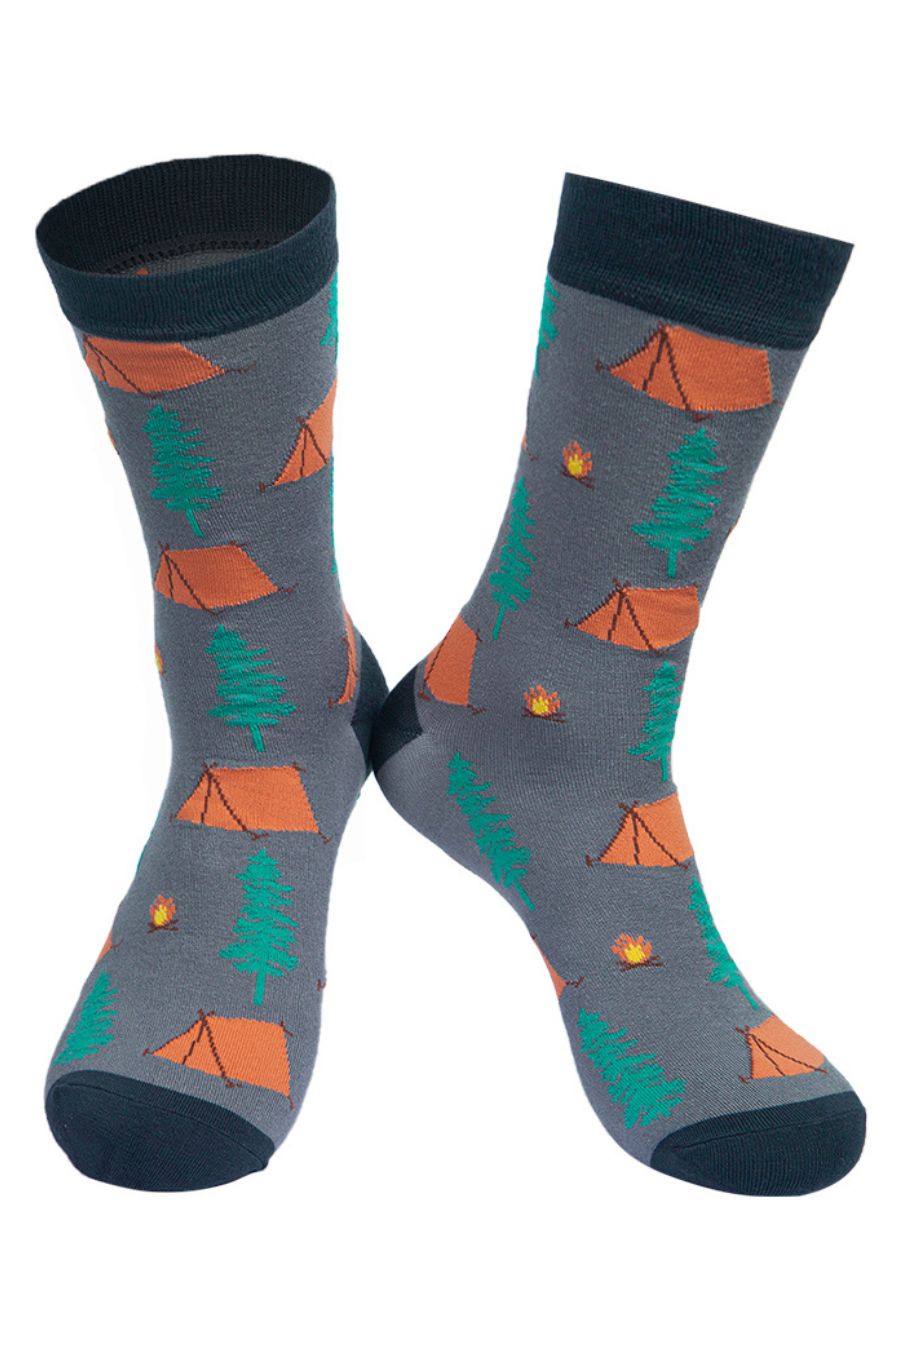 grey bamboo dress socks with a pattern of tents, trees and campfires